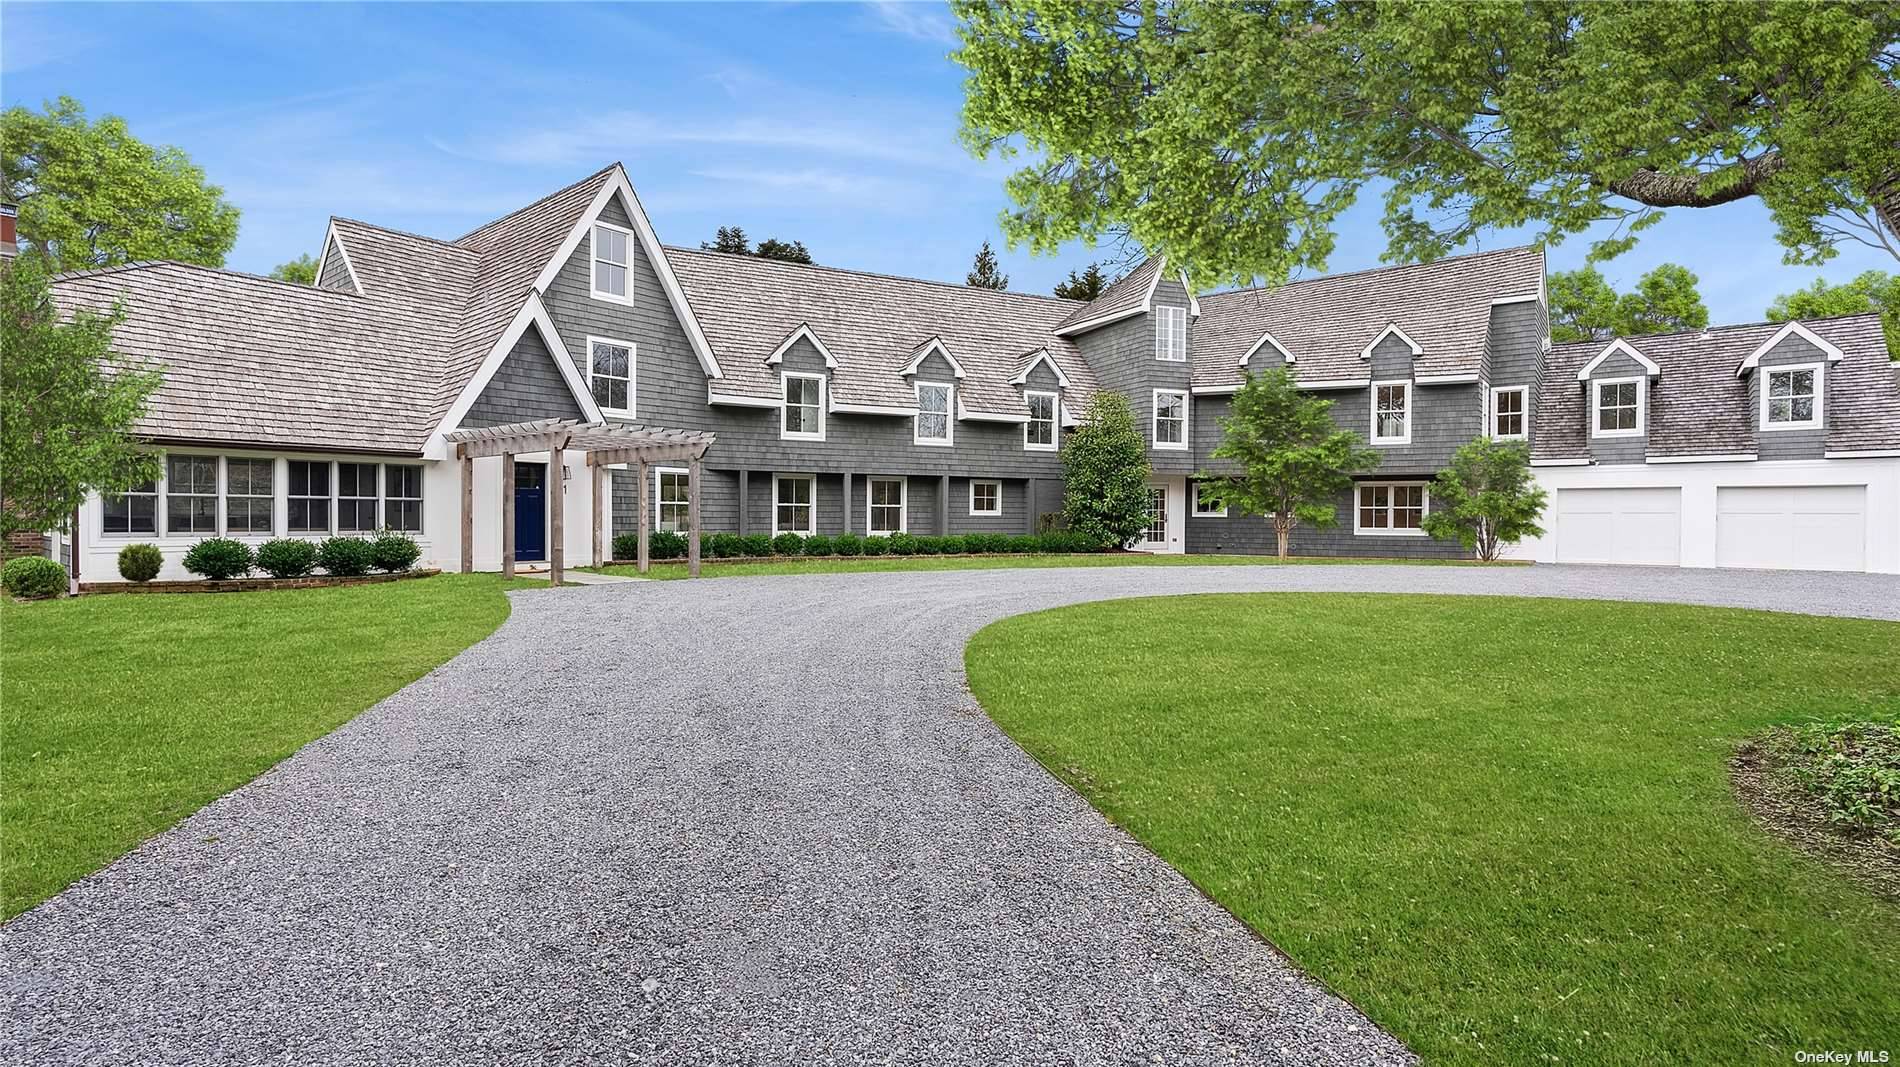 This stunning South of the Highway property is located in East Hampton South ; with the Hamptons ocean beaches, and Amagansett Square shopping restaurants just a mile away !